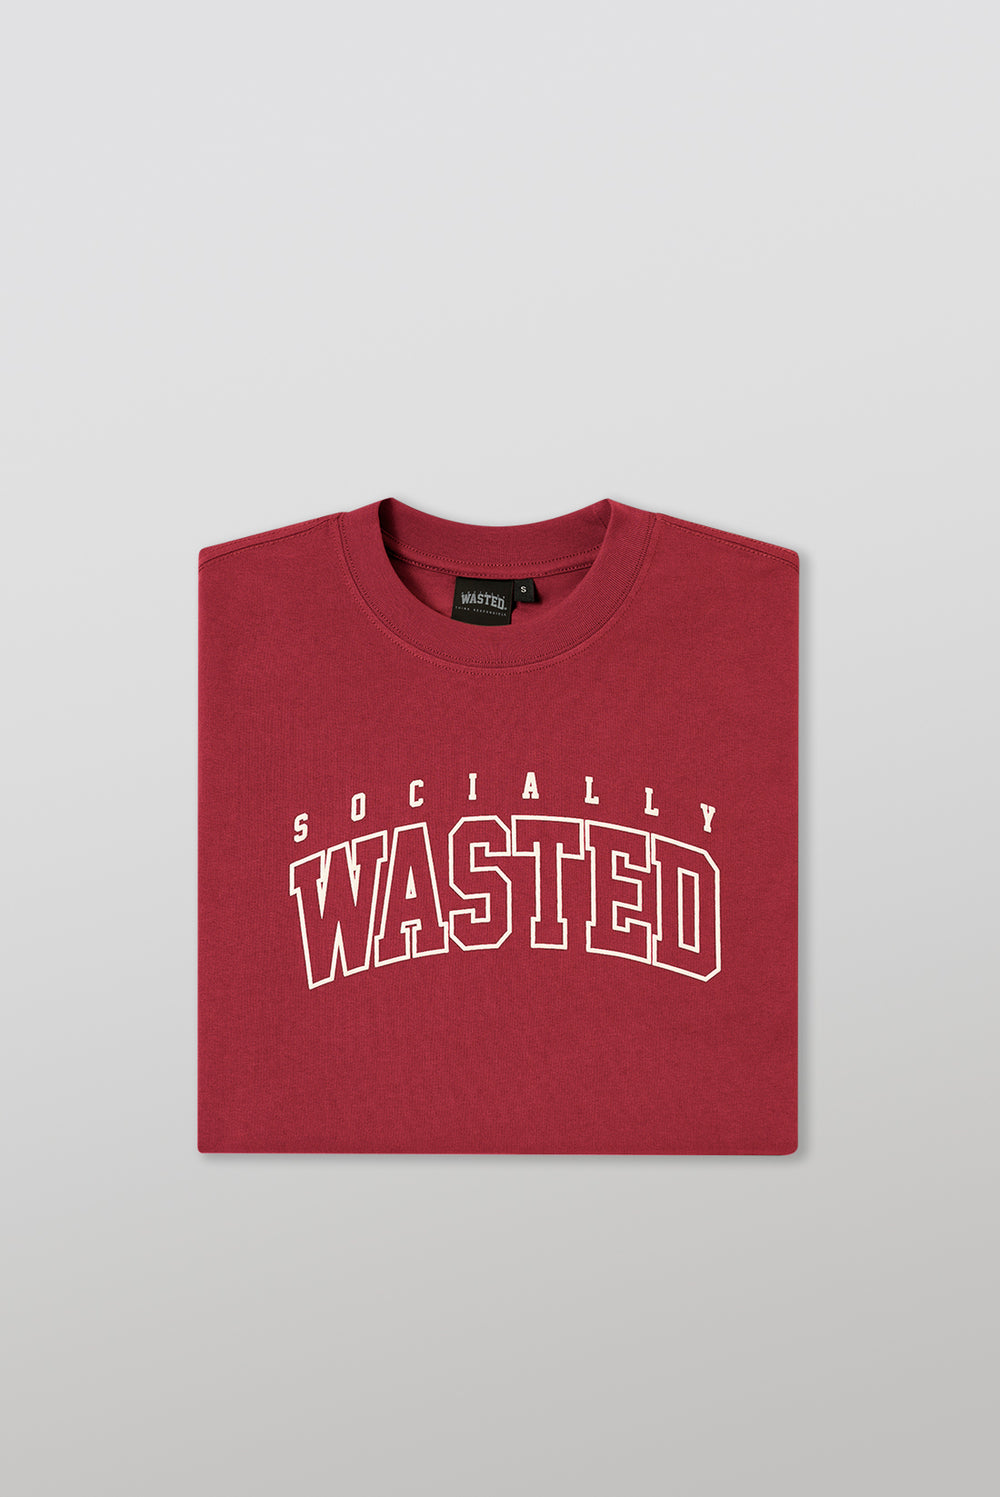 Socially Wasted Flagship Cranberry